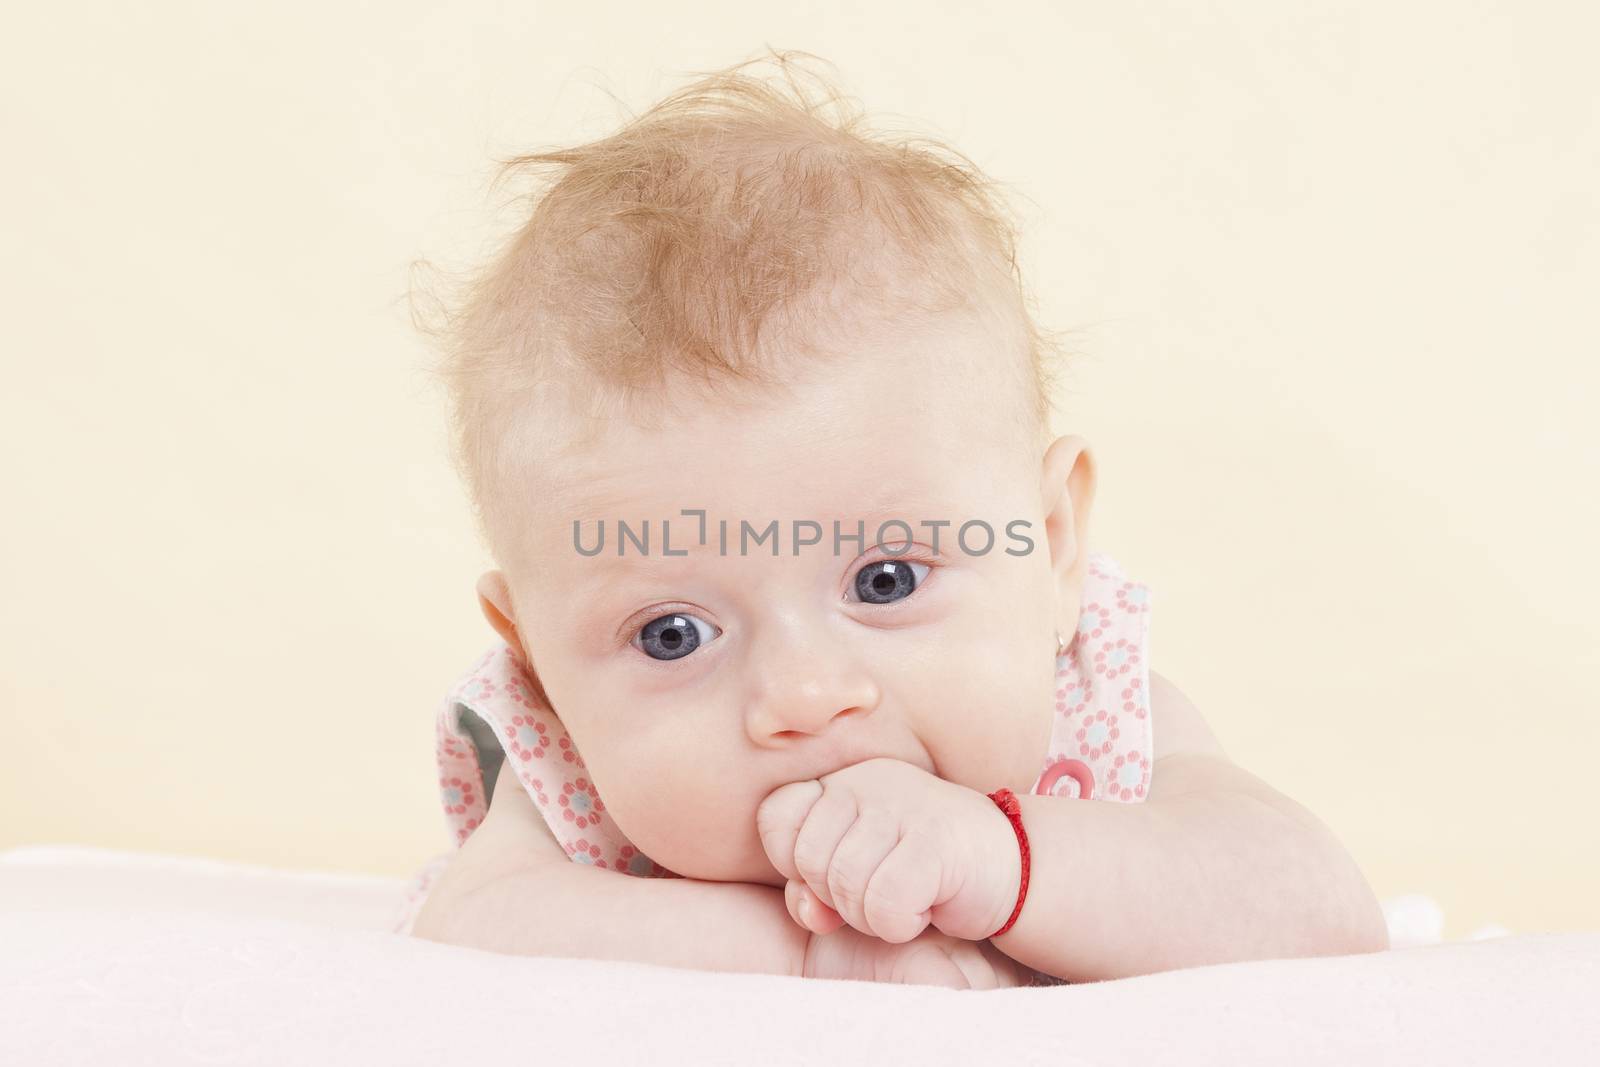 Baby girl with big blue eyes and fist in mouth portrait. Cute newborn concept.